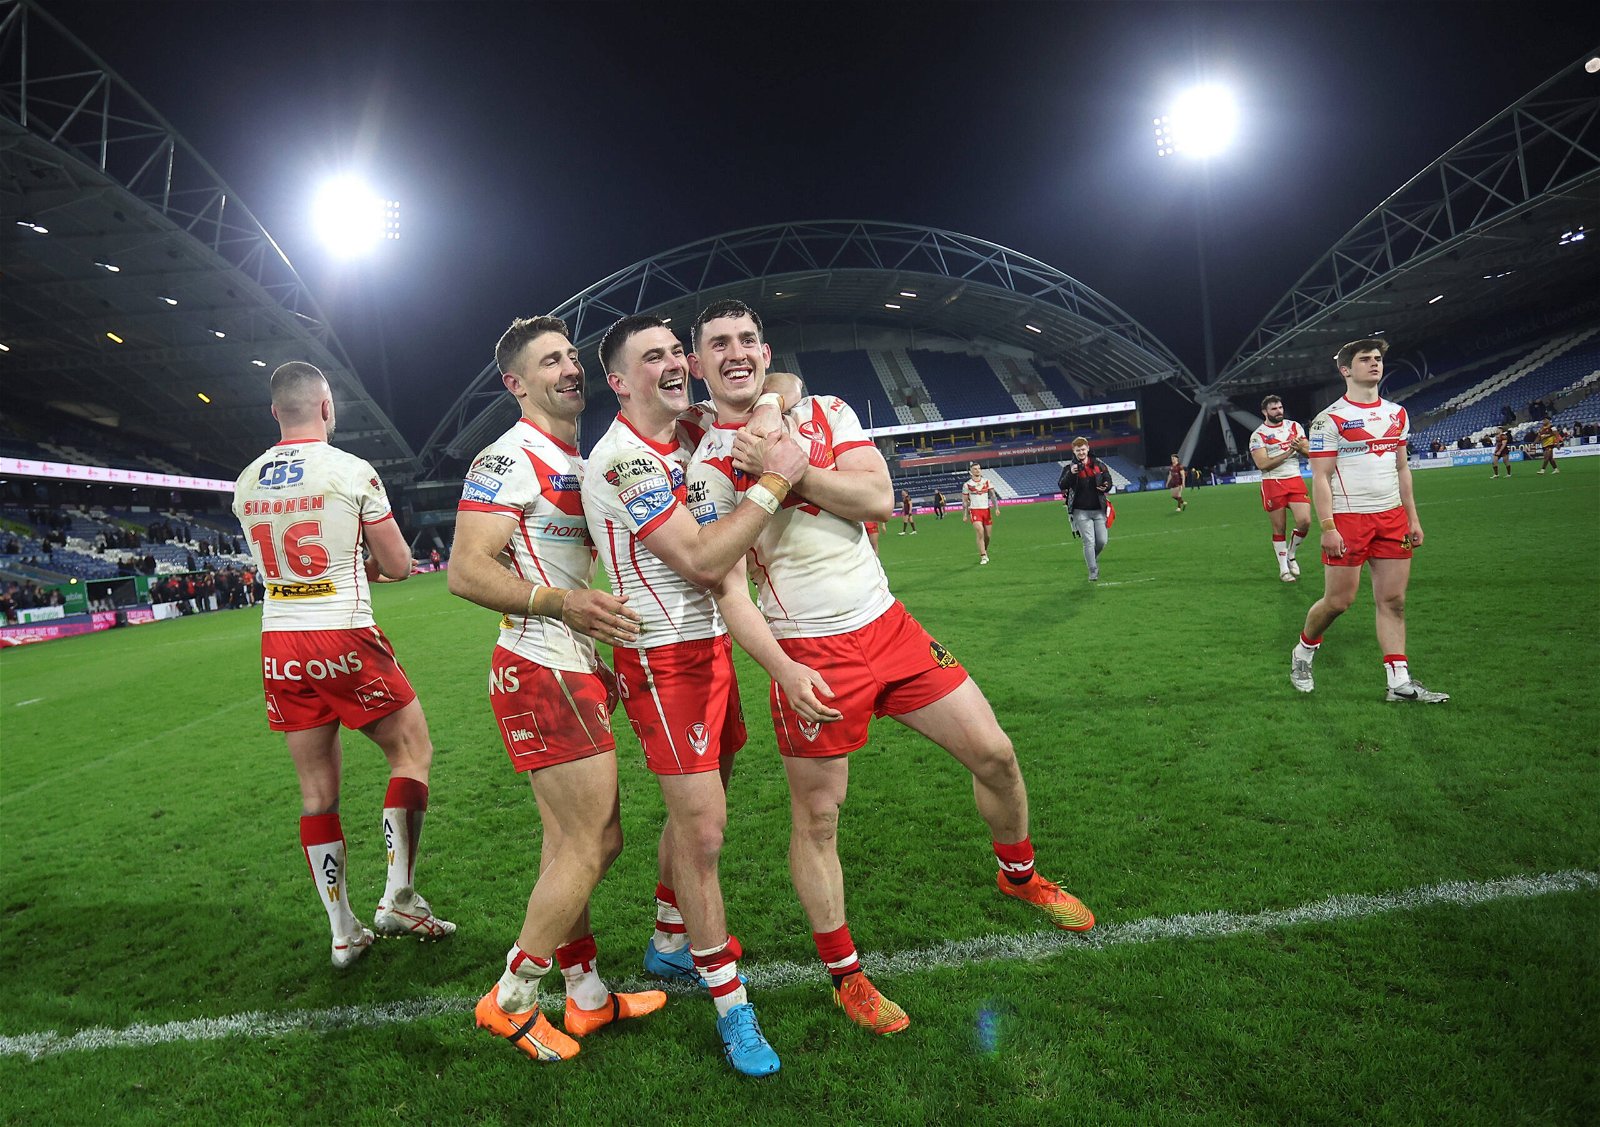 St Helens' Tommy Makinson, Lewis Dodd and Matt Whitley celebrate after the game at Huddersfield